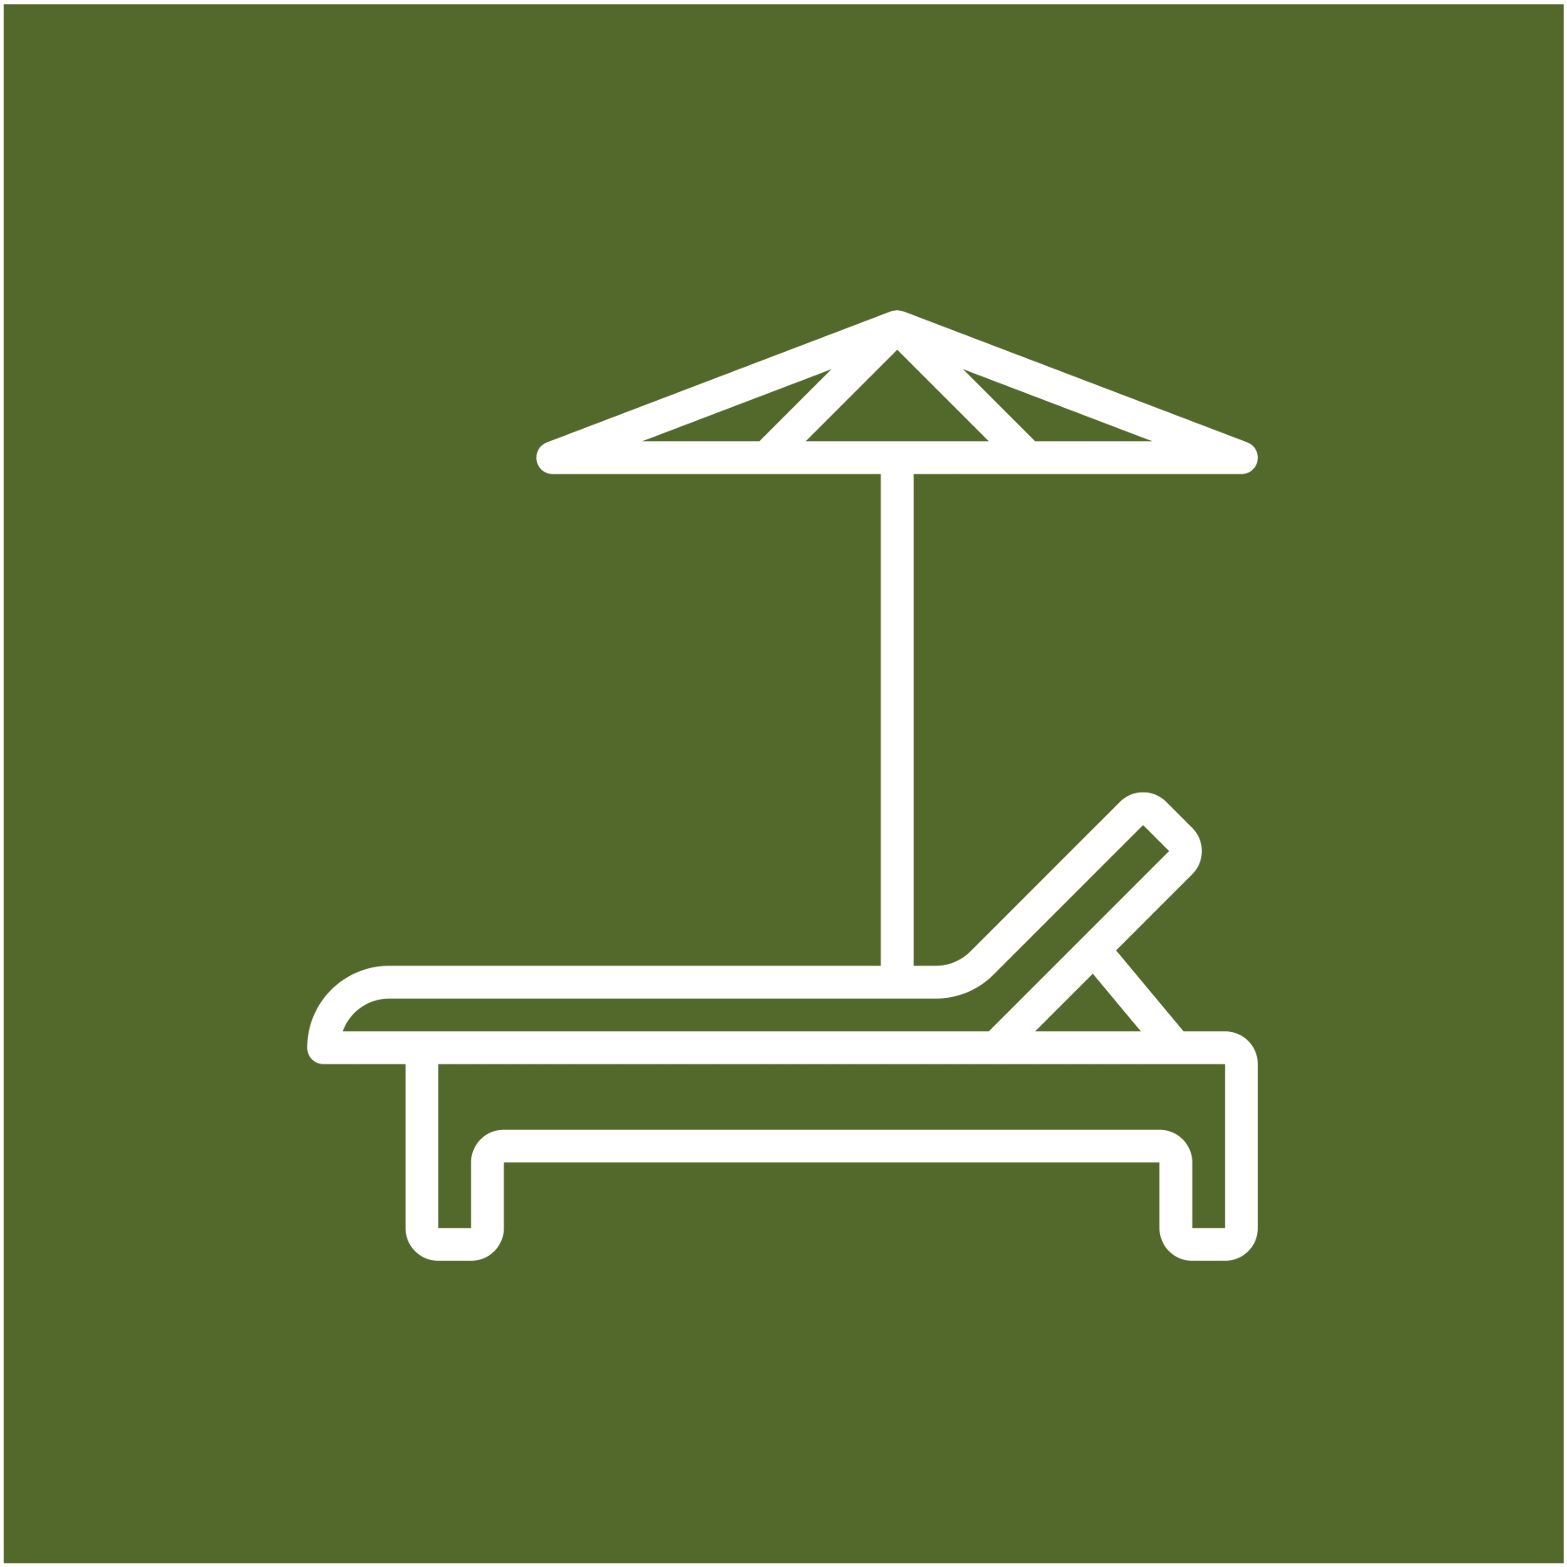 UOB - Annual leave icon.png